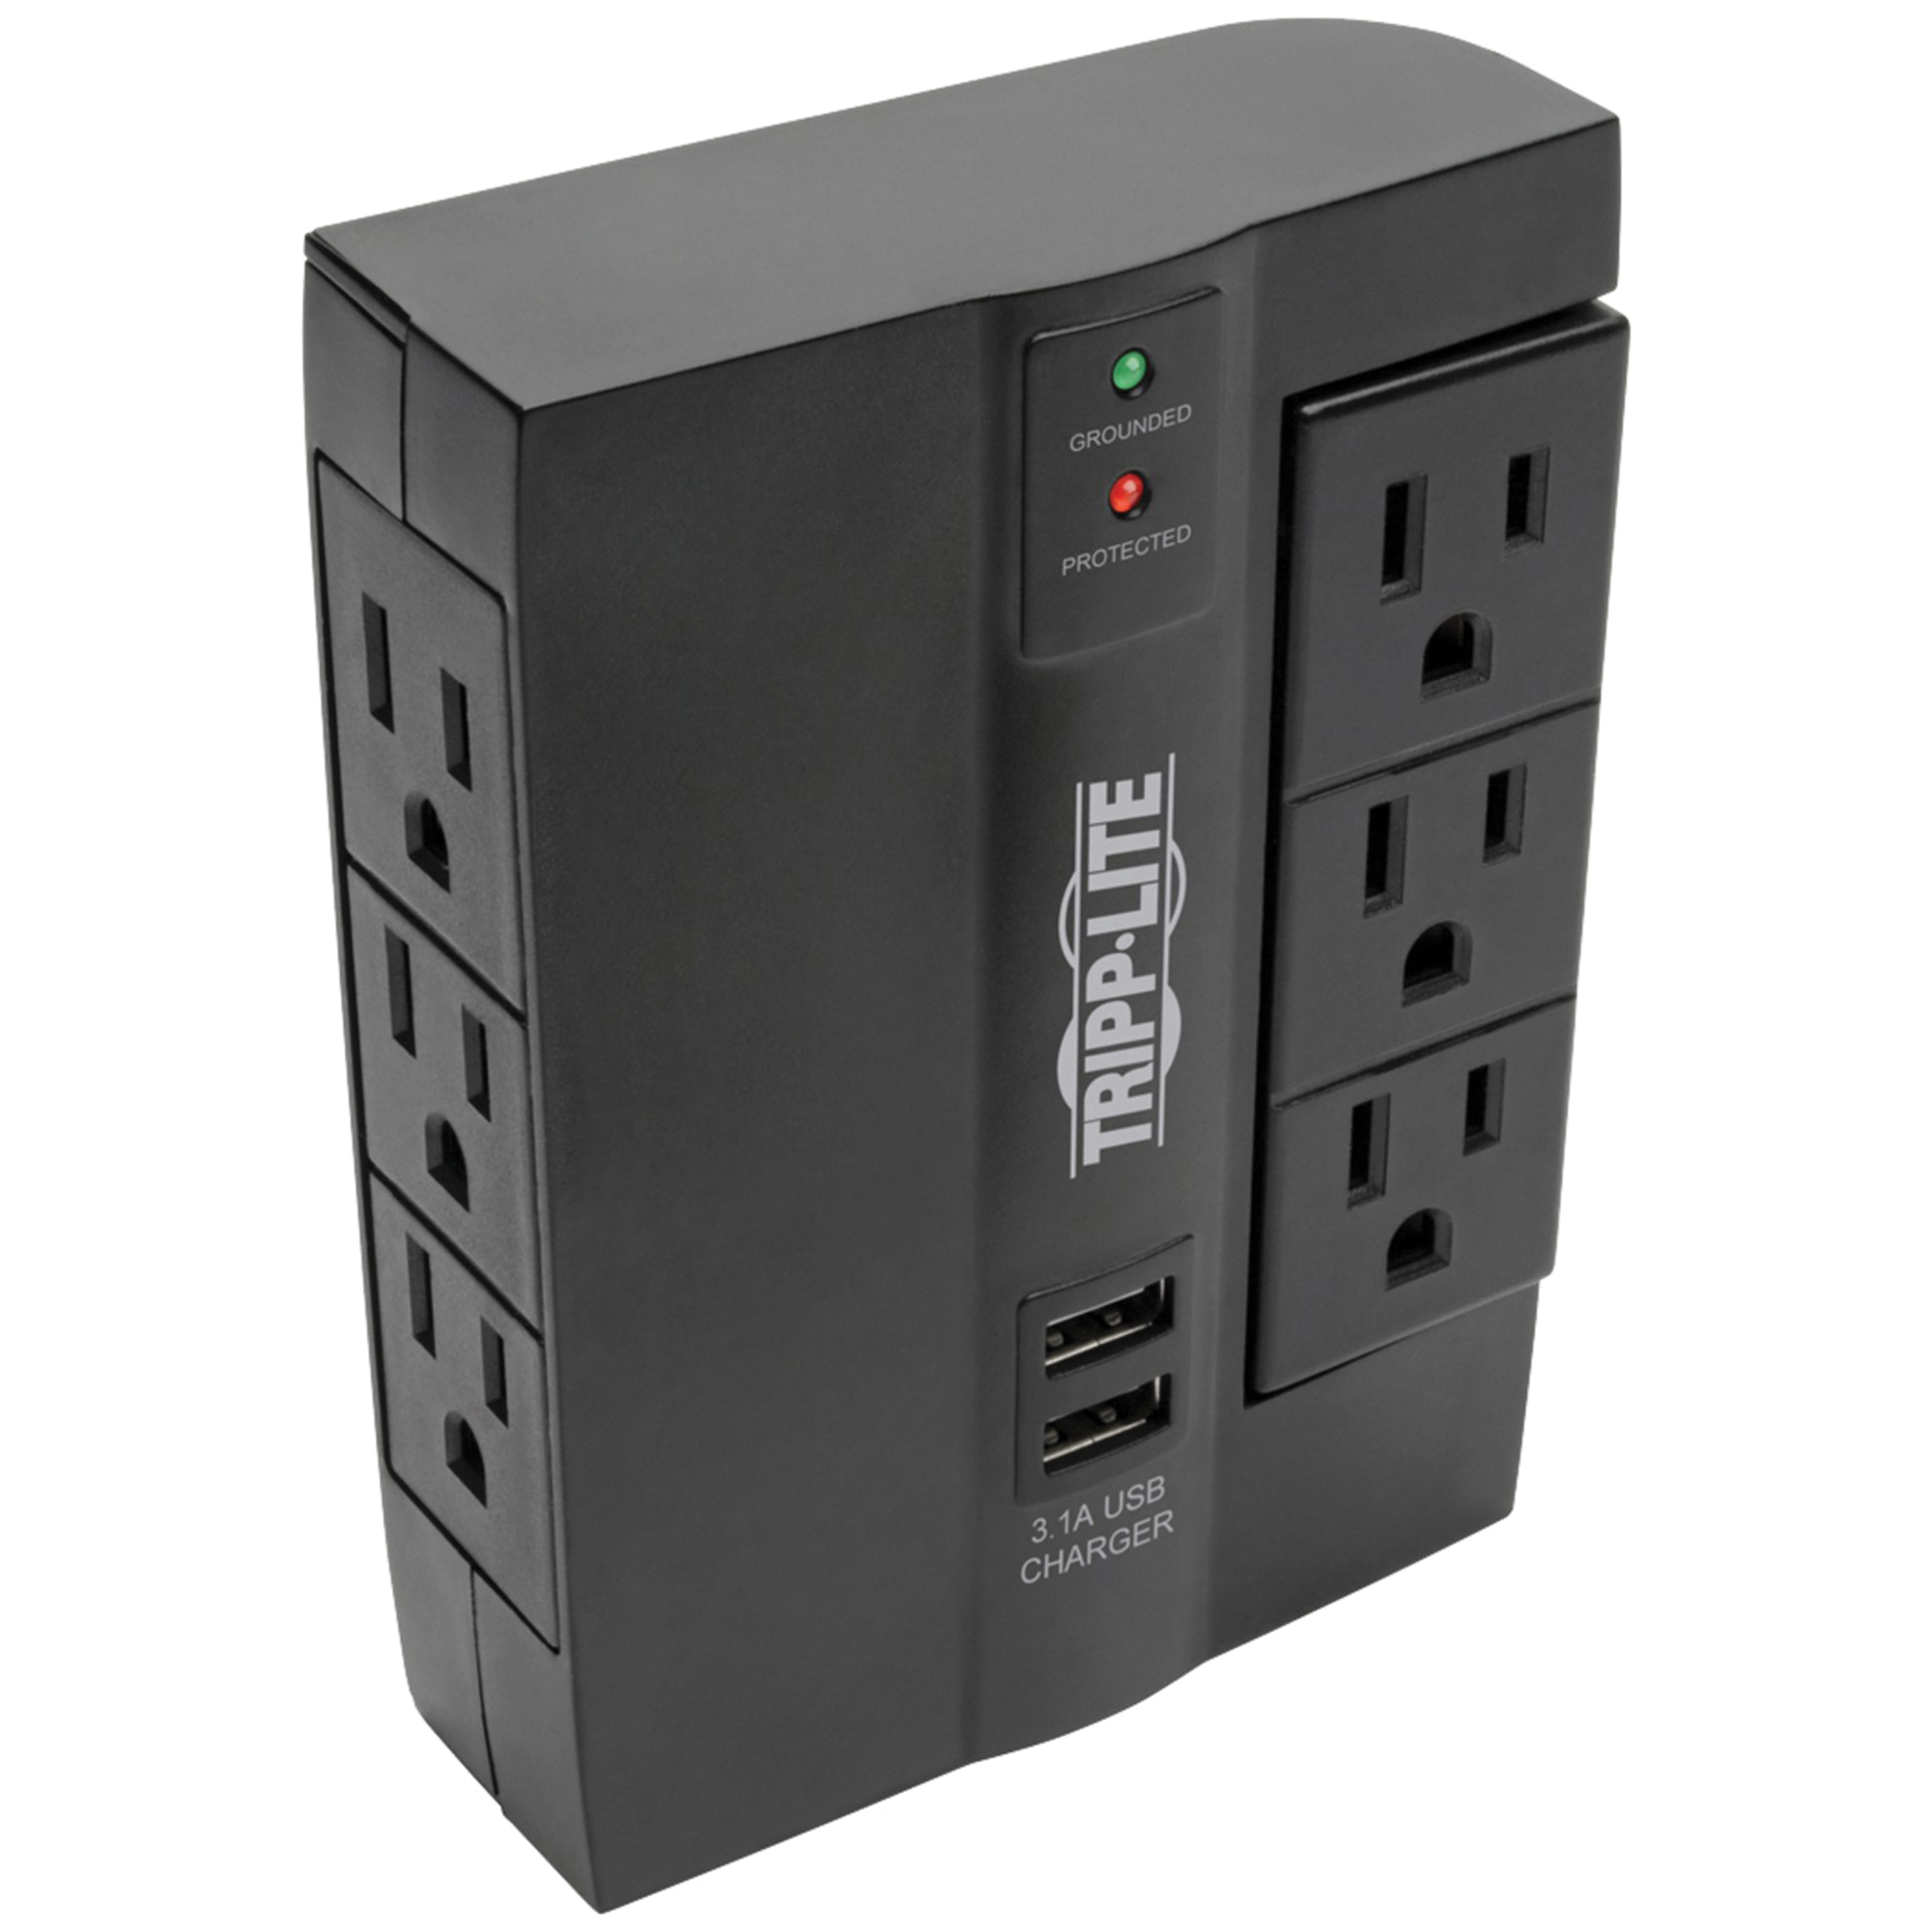 Tripp Lite by Eaton Protect It!, 6-Outlet Surge Protector with USB Ports, Model SWIVEL6USB